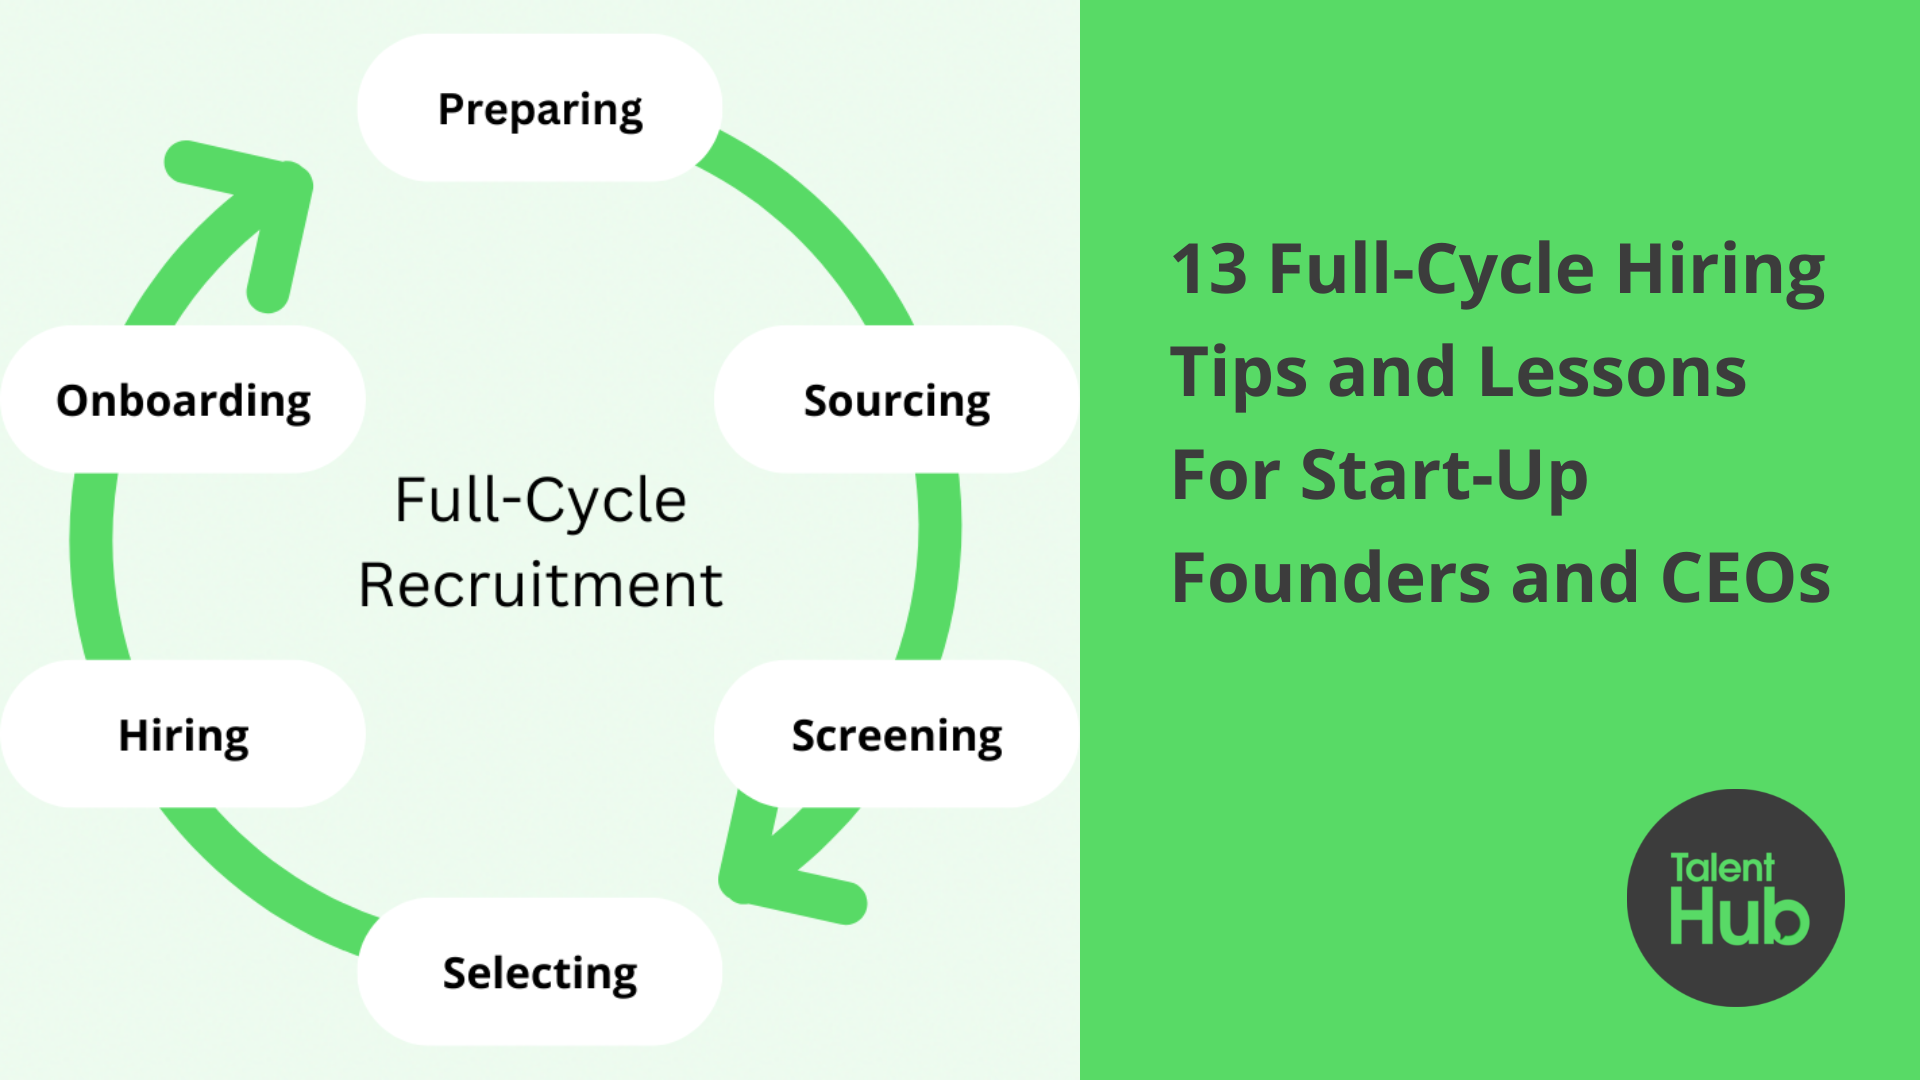 13 Full-Cycle Hiring Tips and Lessons For Start-Up Founders and CEOs